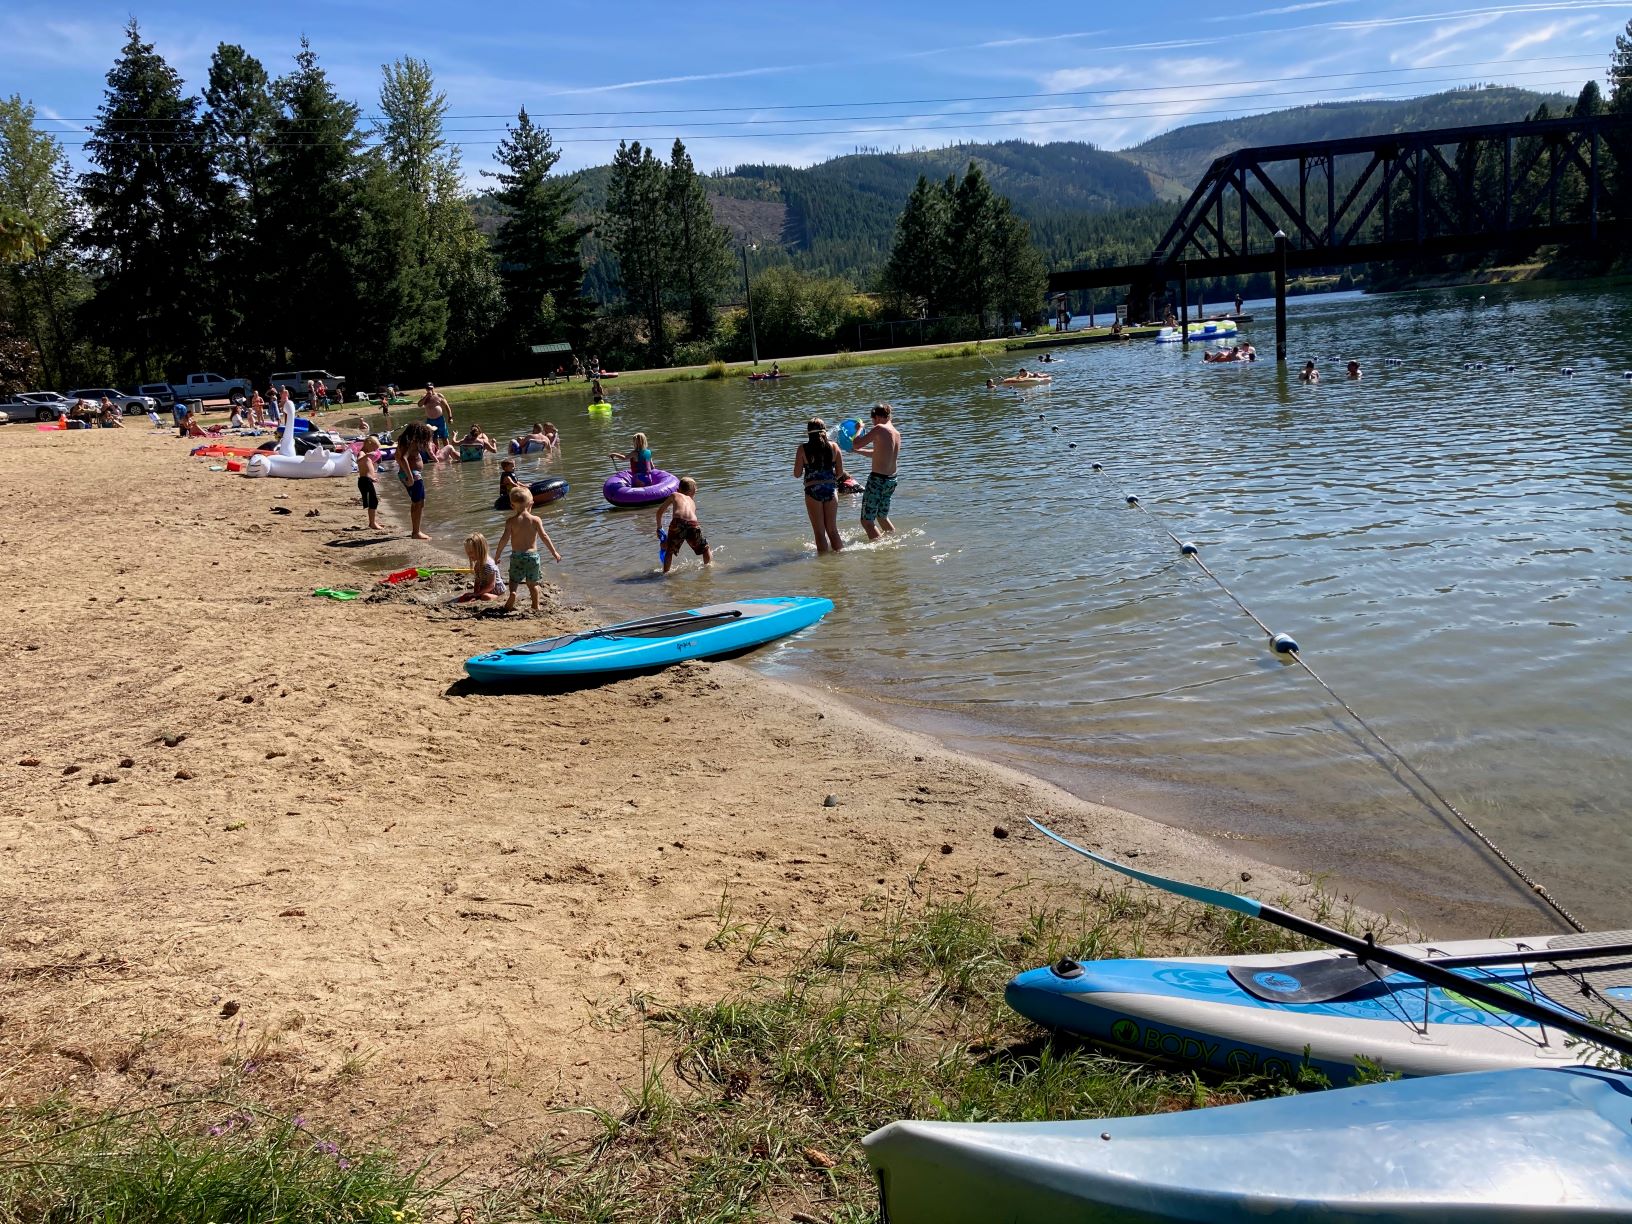 People standing on the sandy beach and in the water at Priest River Recreation Area, with kayaks and other paddling gear on the shoreline.